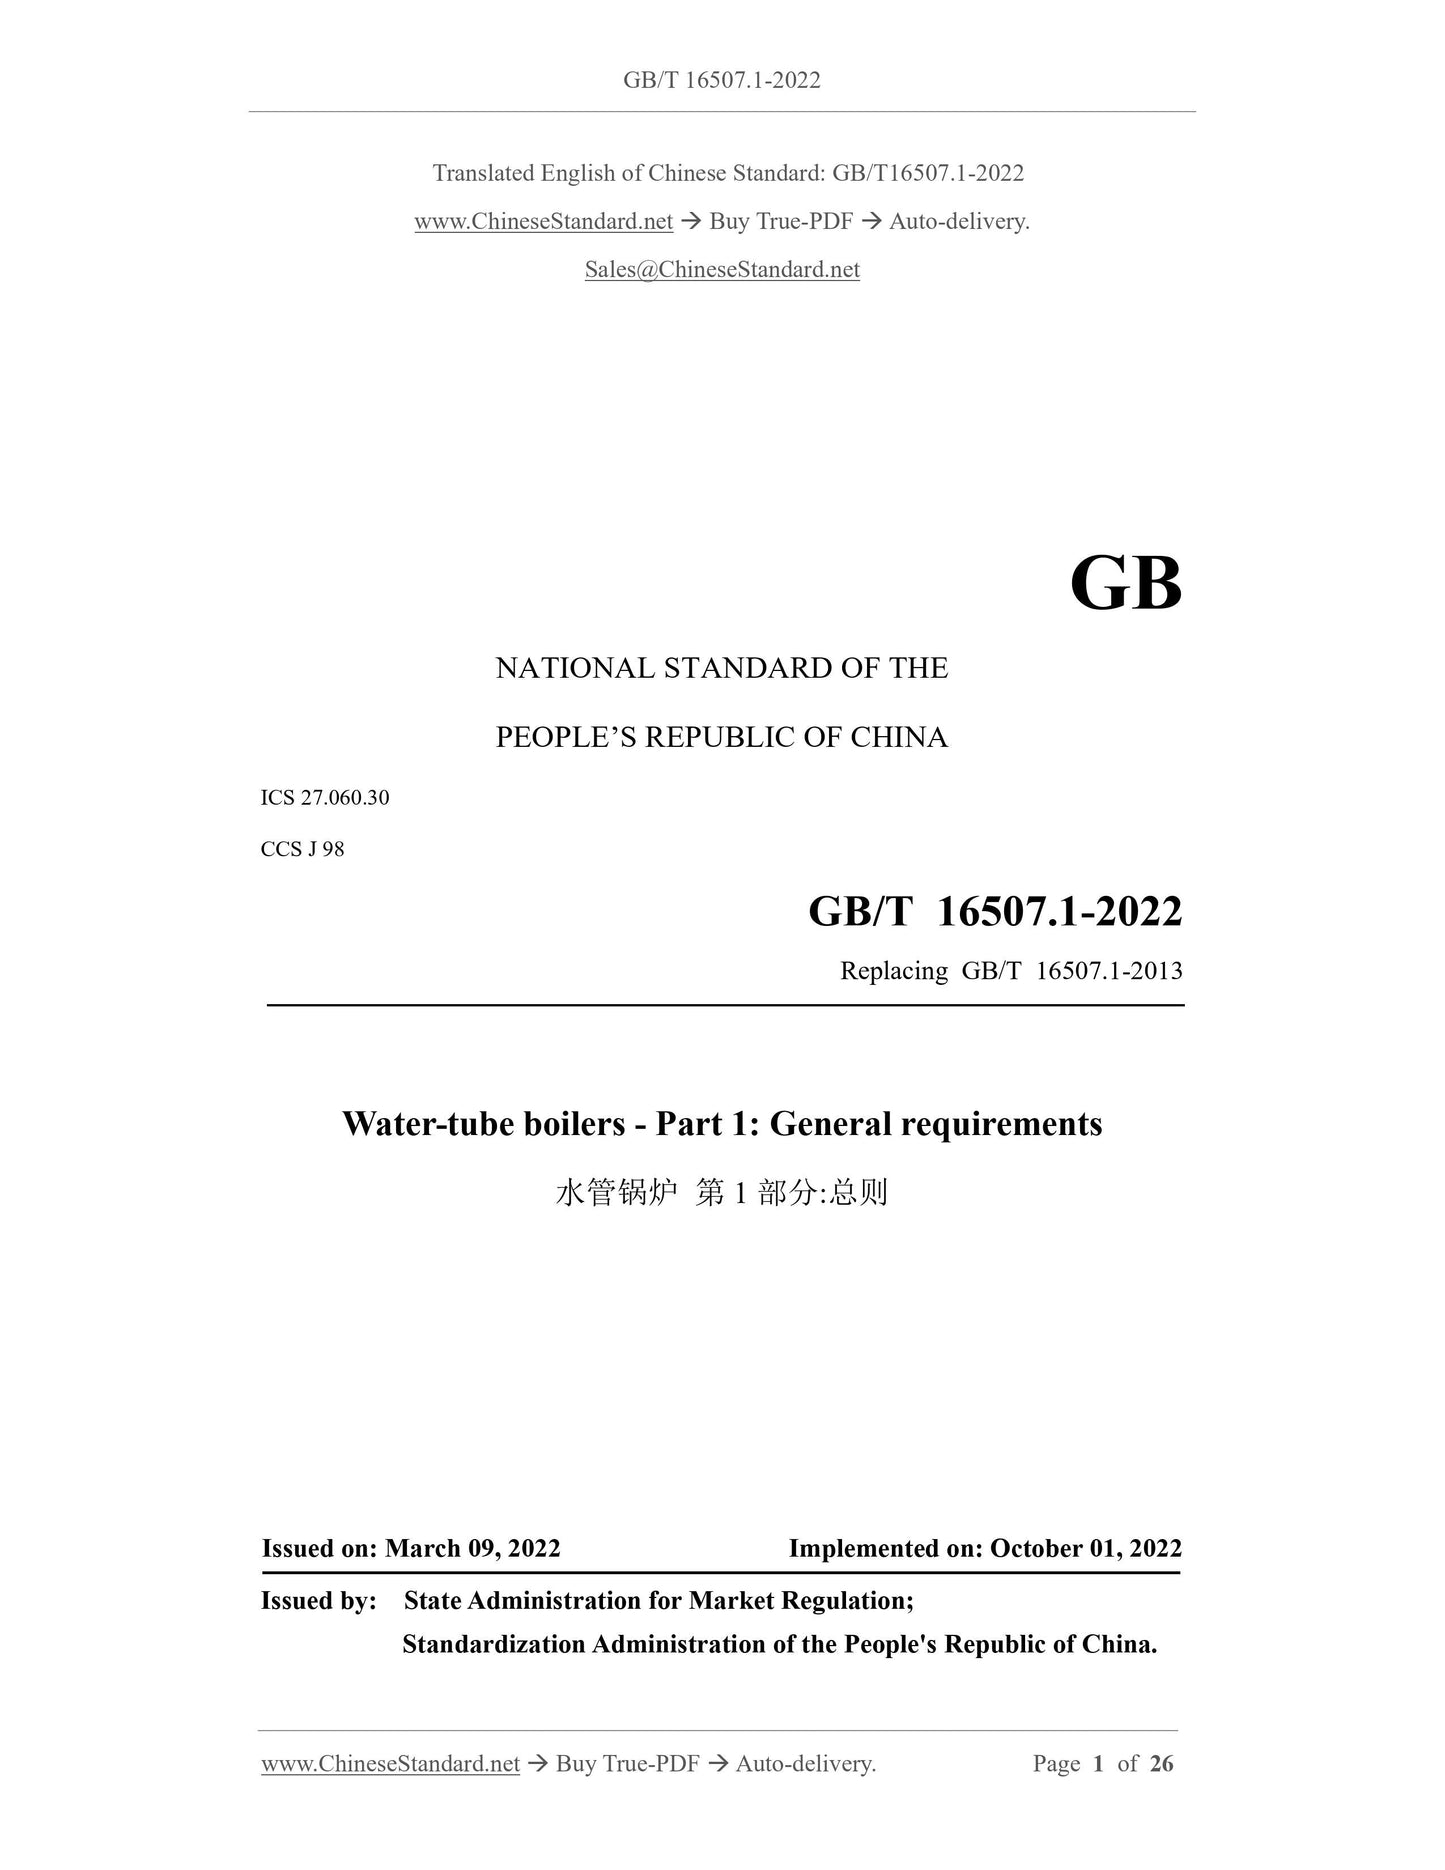 GB/T 16507.1-2022 Page 1